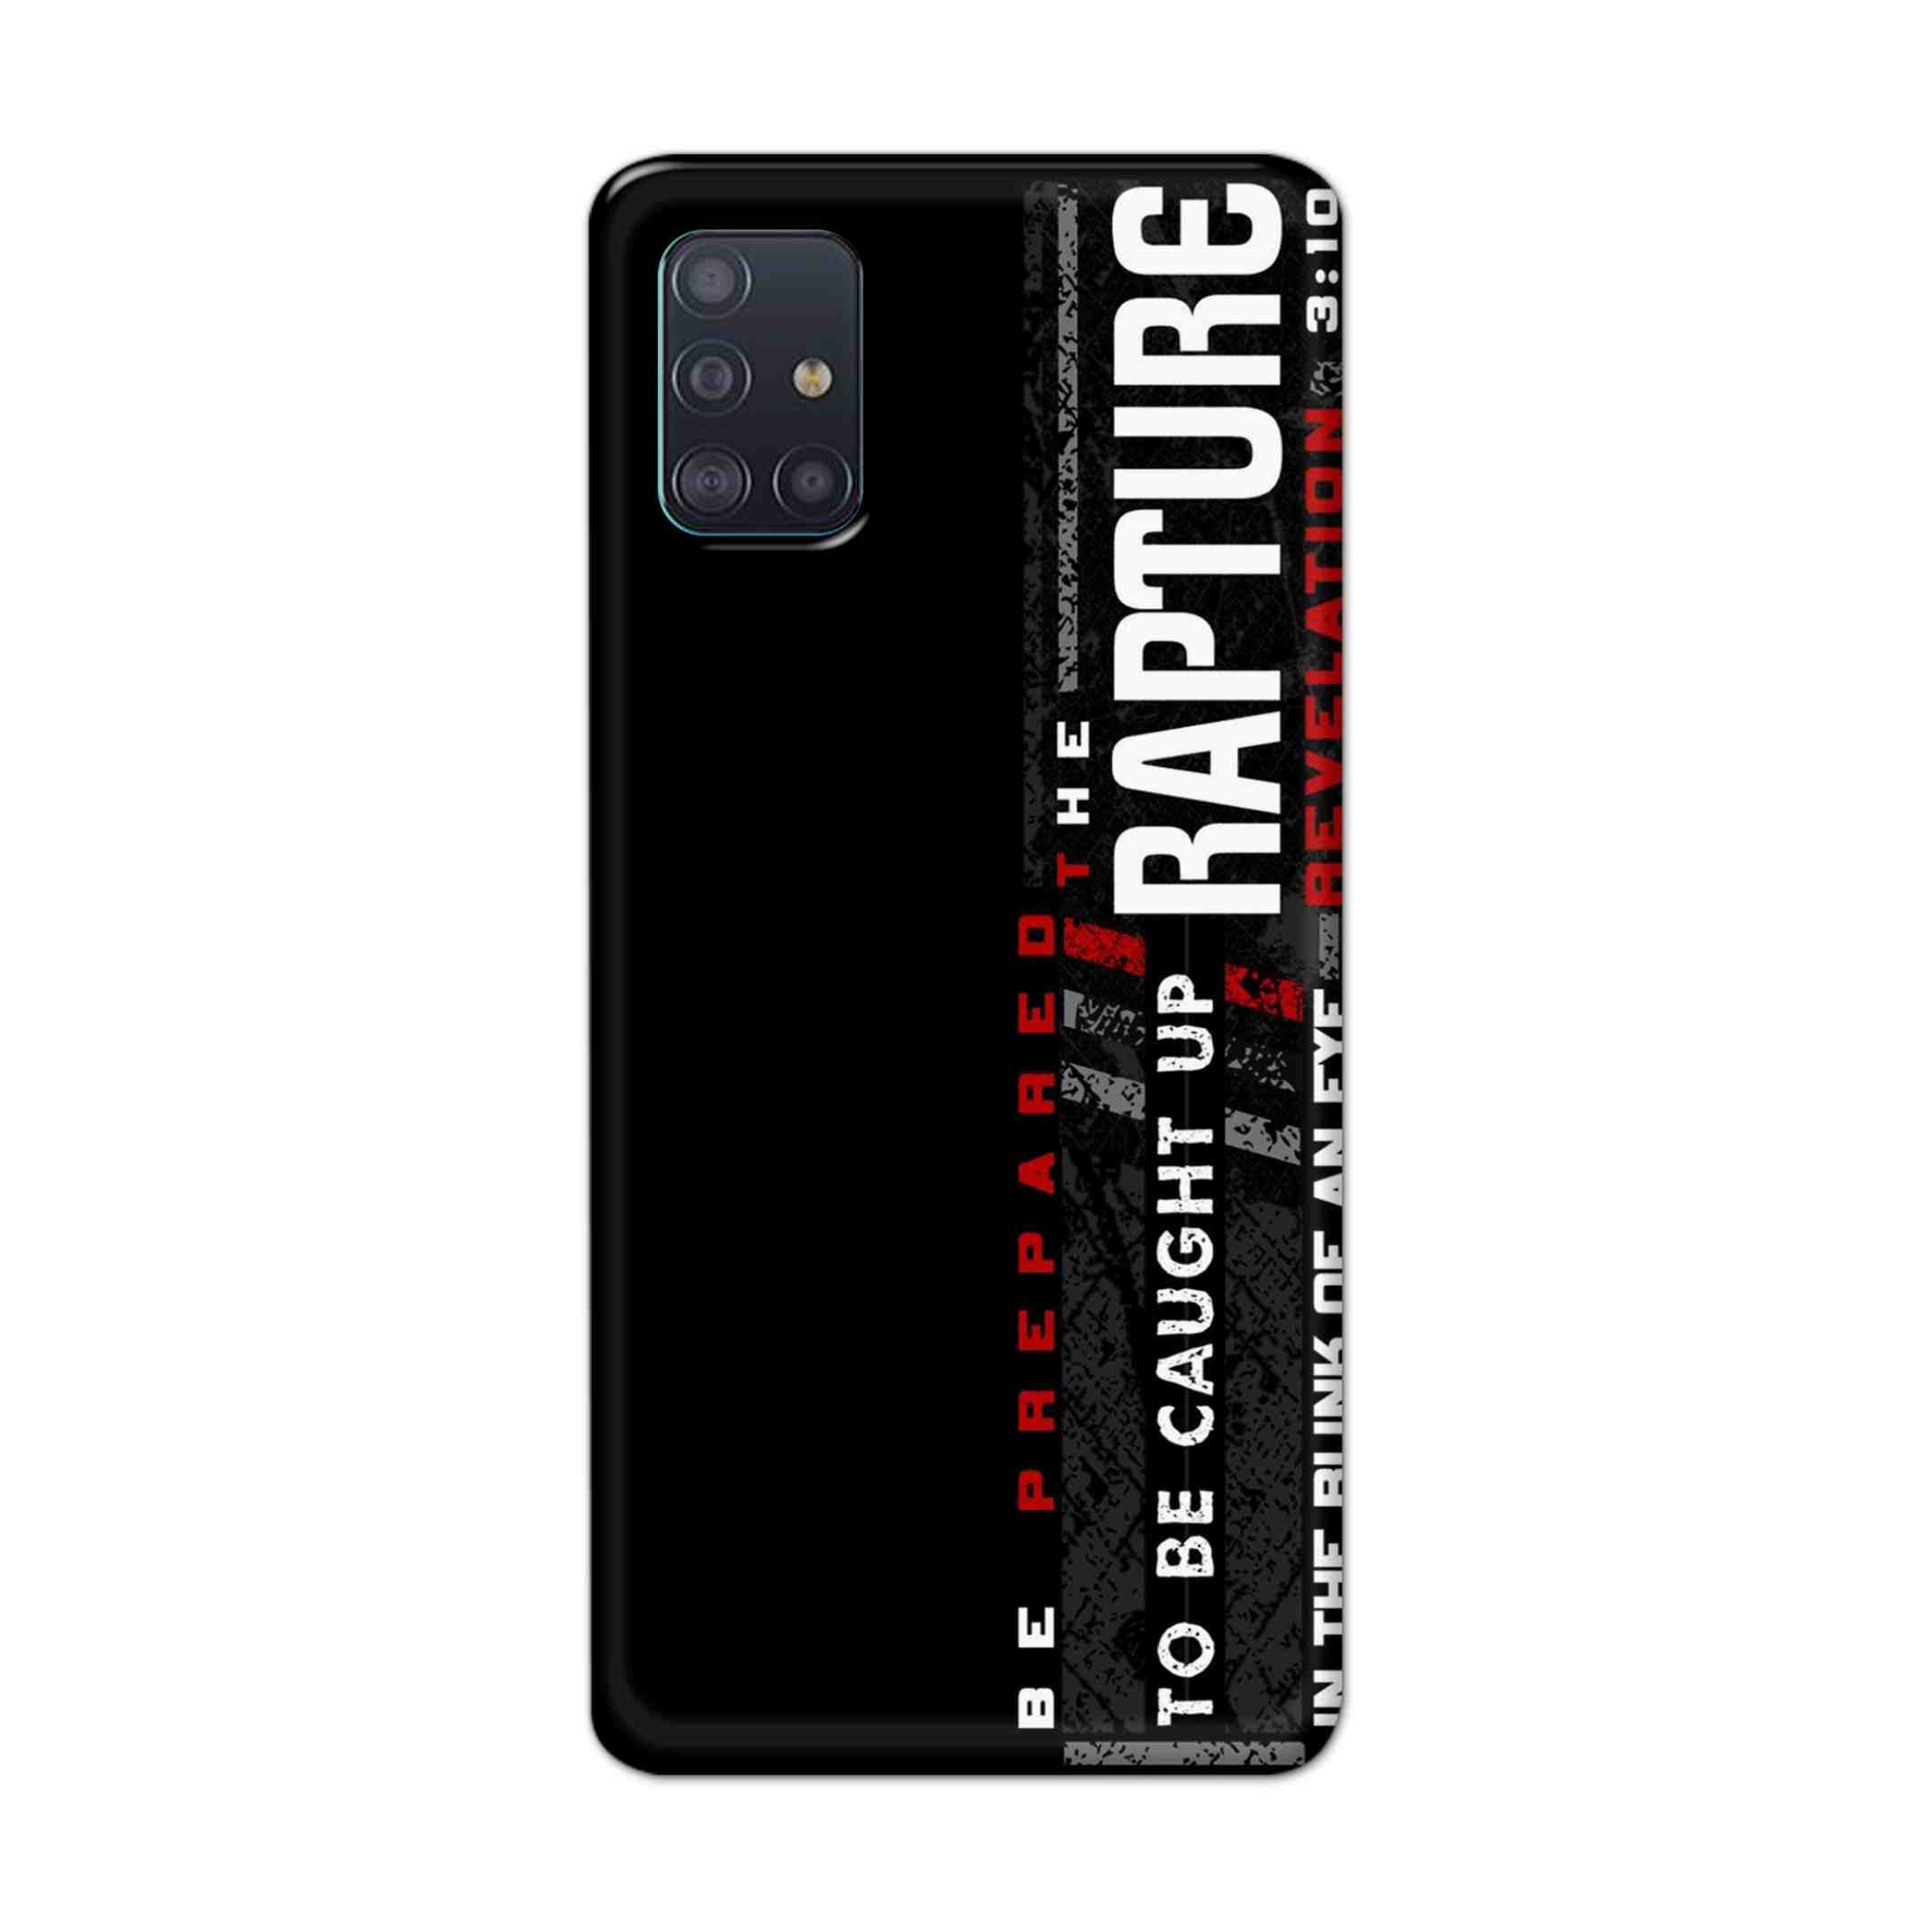 Buy Rapture Hard Back Mobile Phone Case Cover For Samsung Galaxy A71 Online